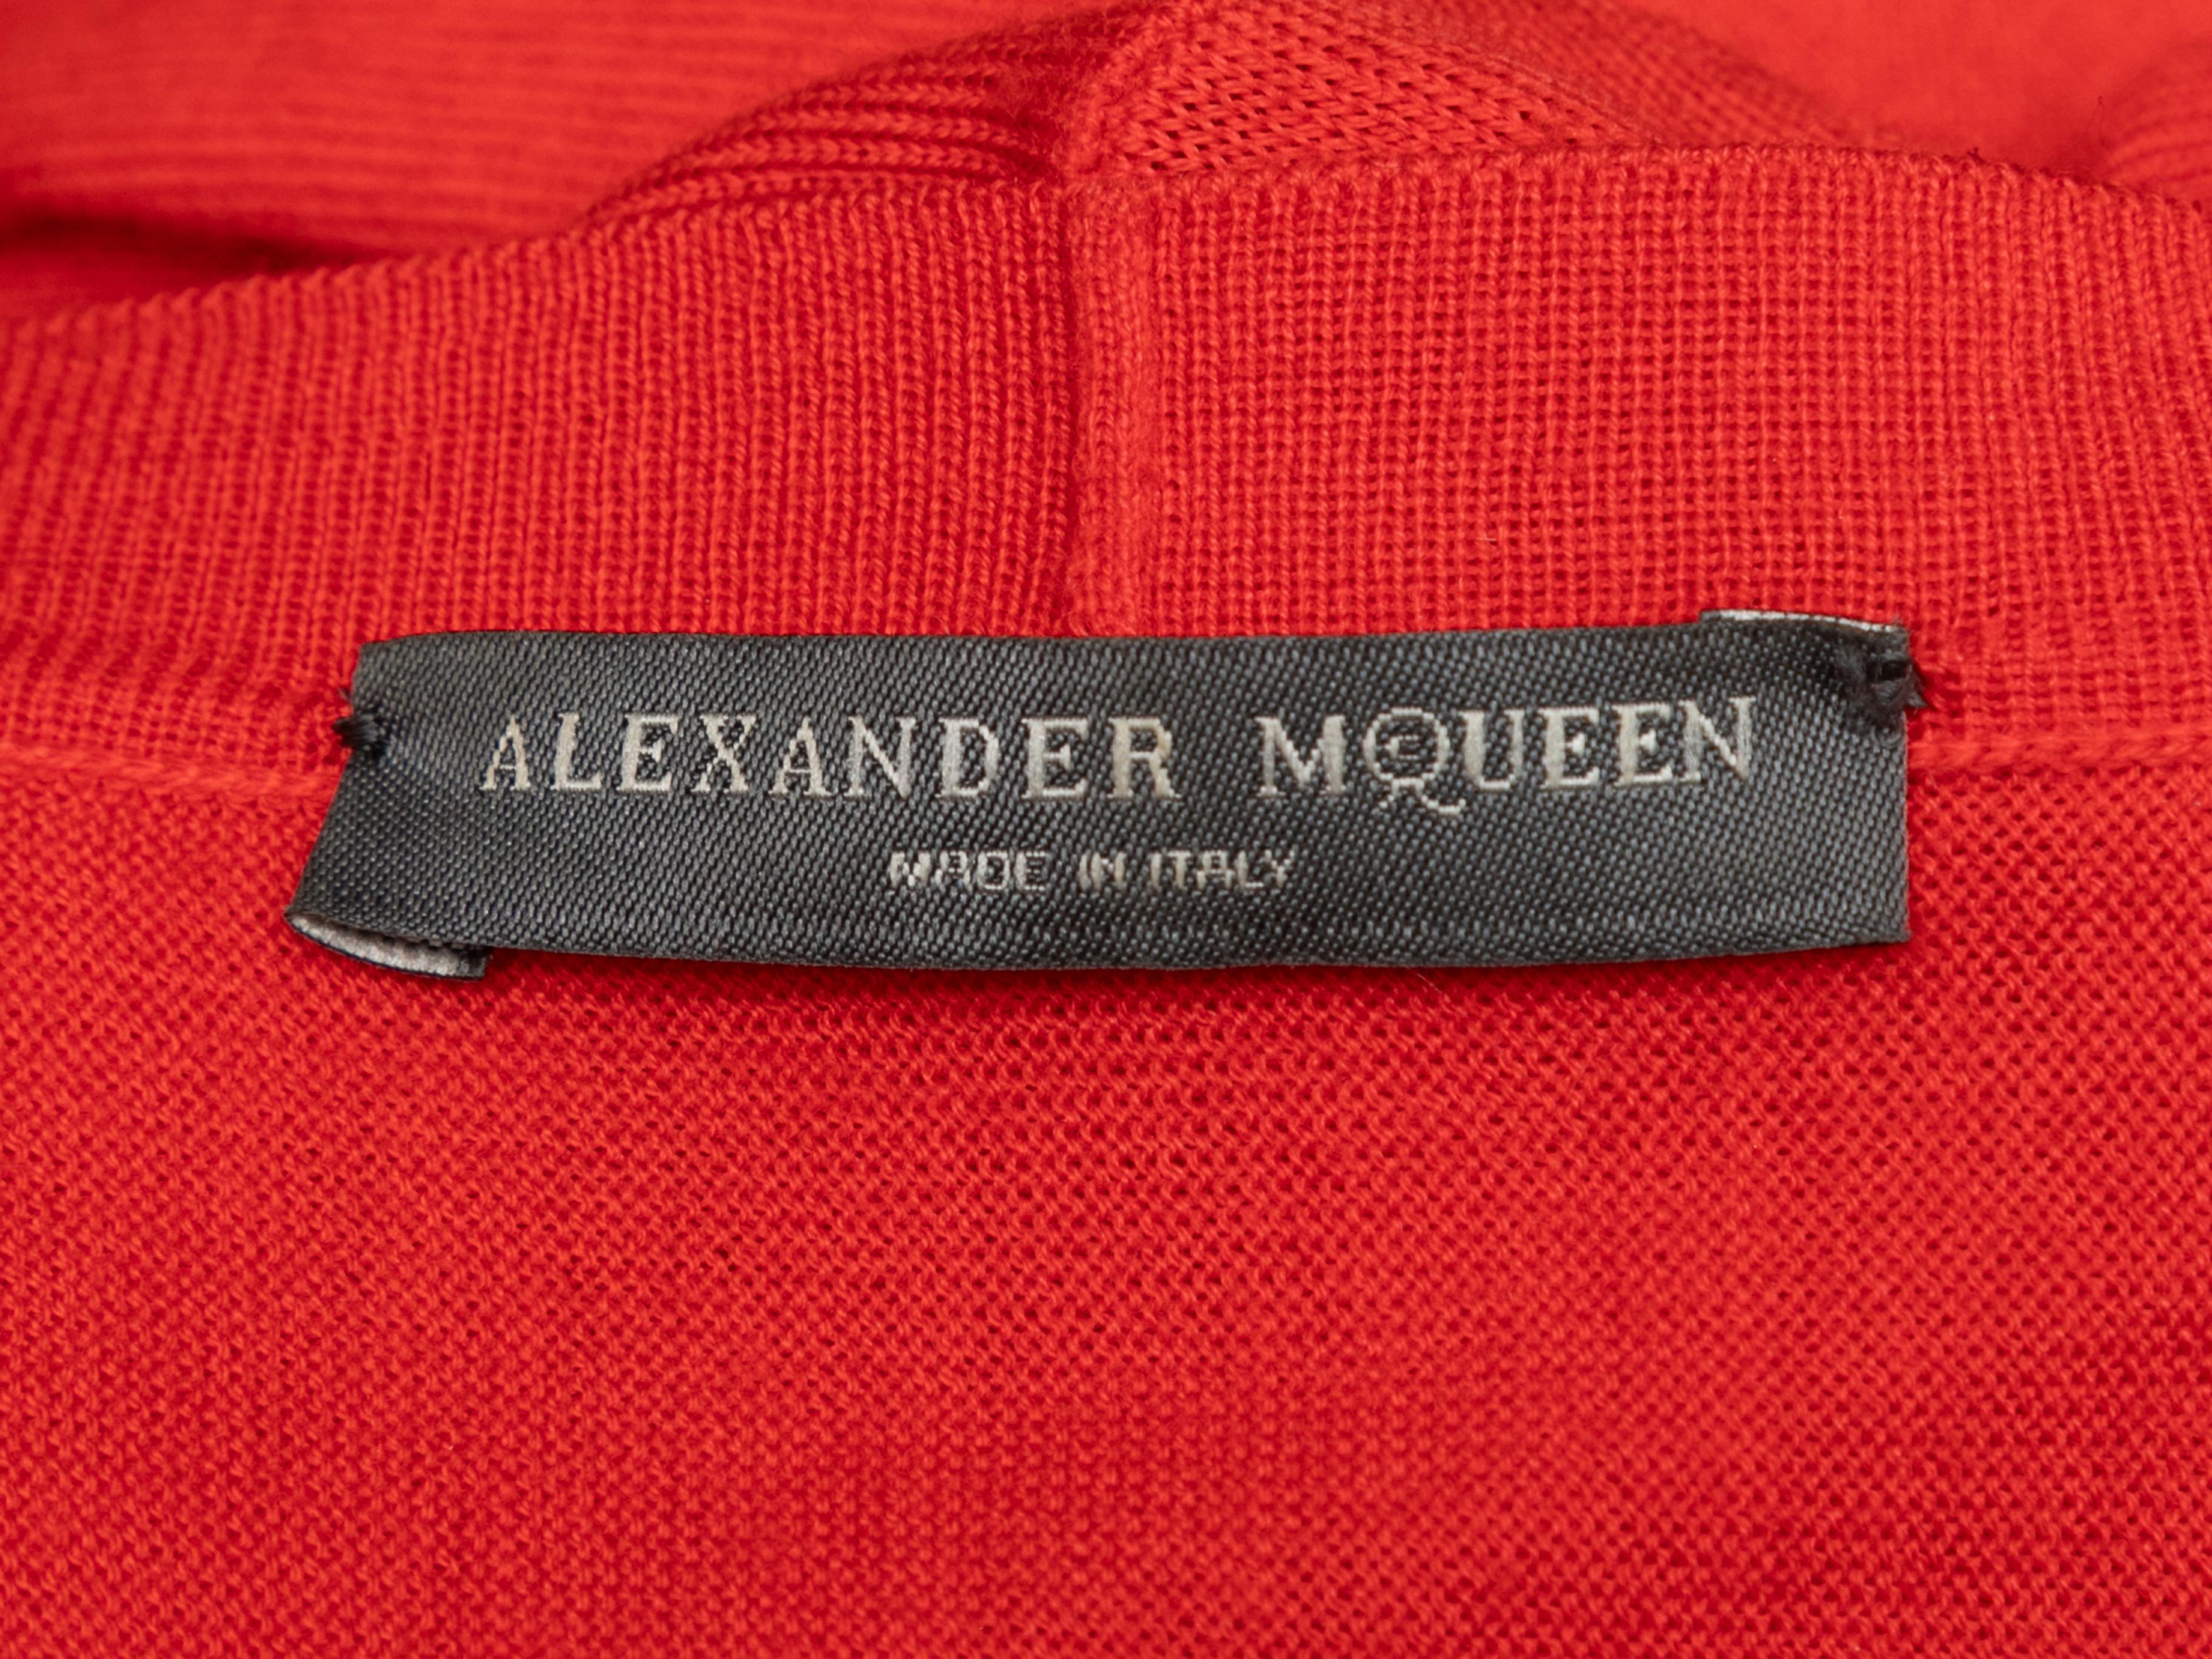 Red wool peplum cardigan by Alexander McQueen. V-neck. Button closures at center front. 35